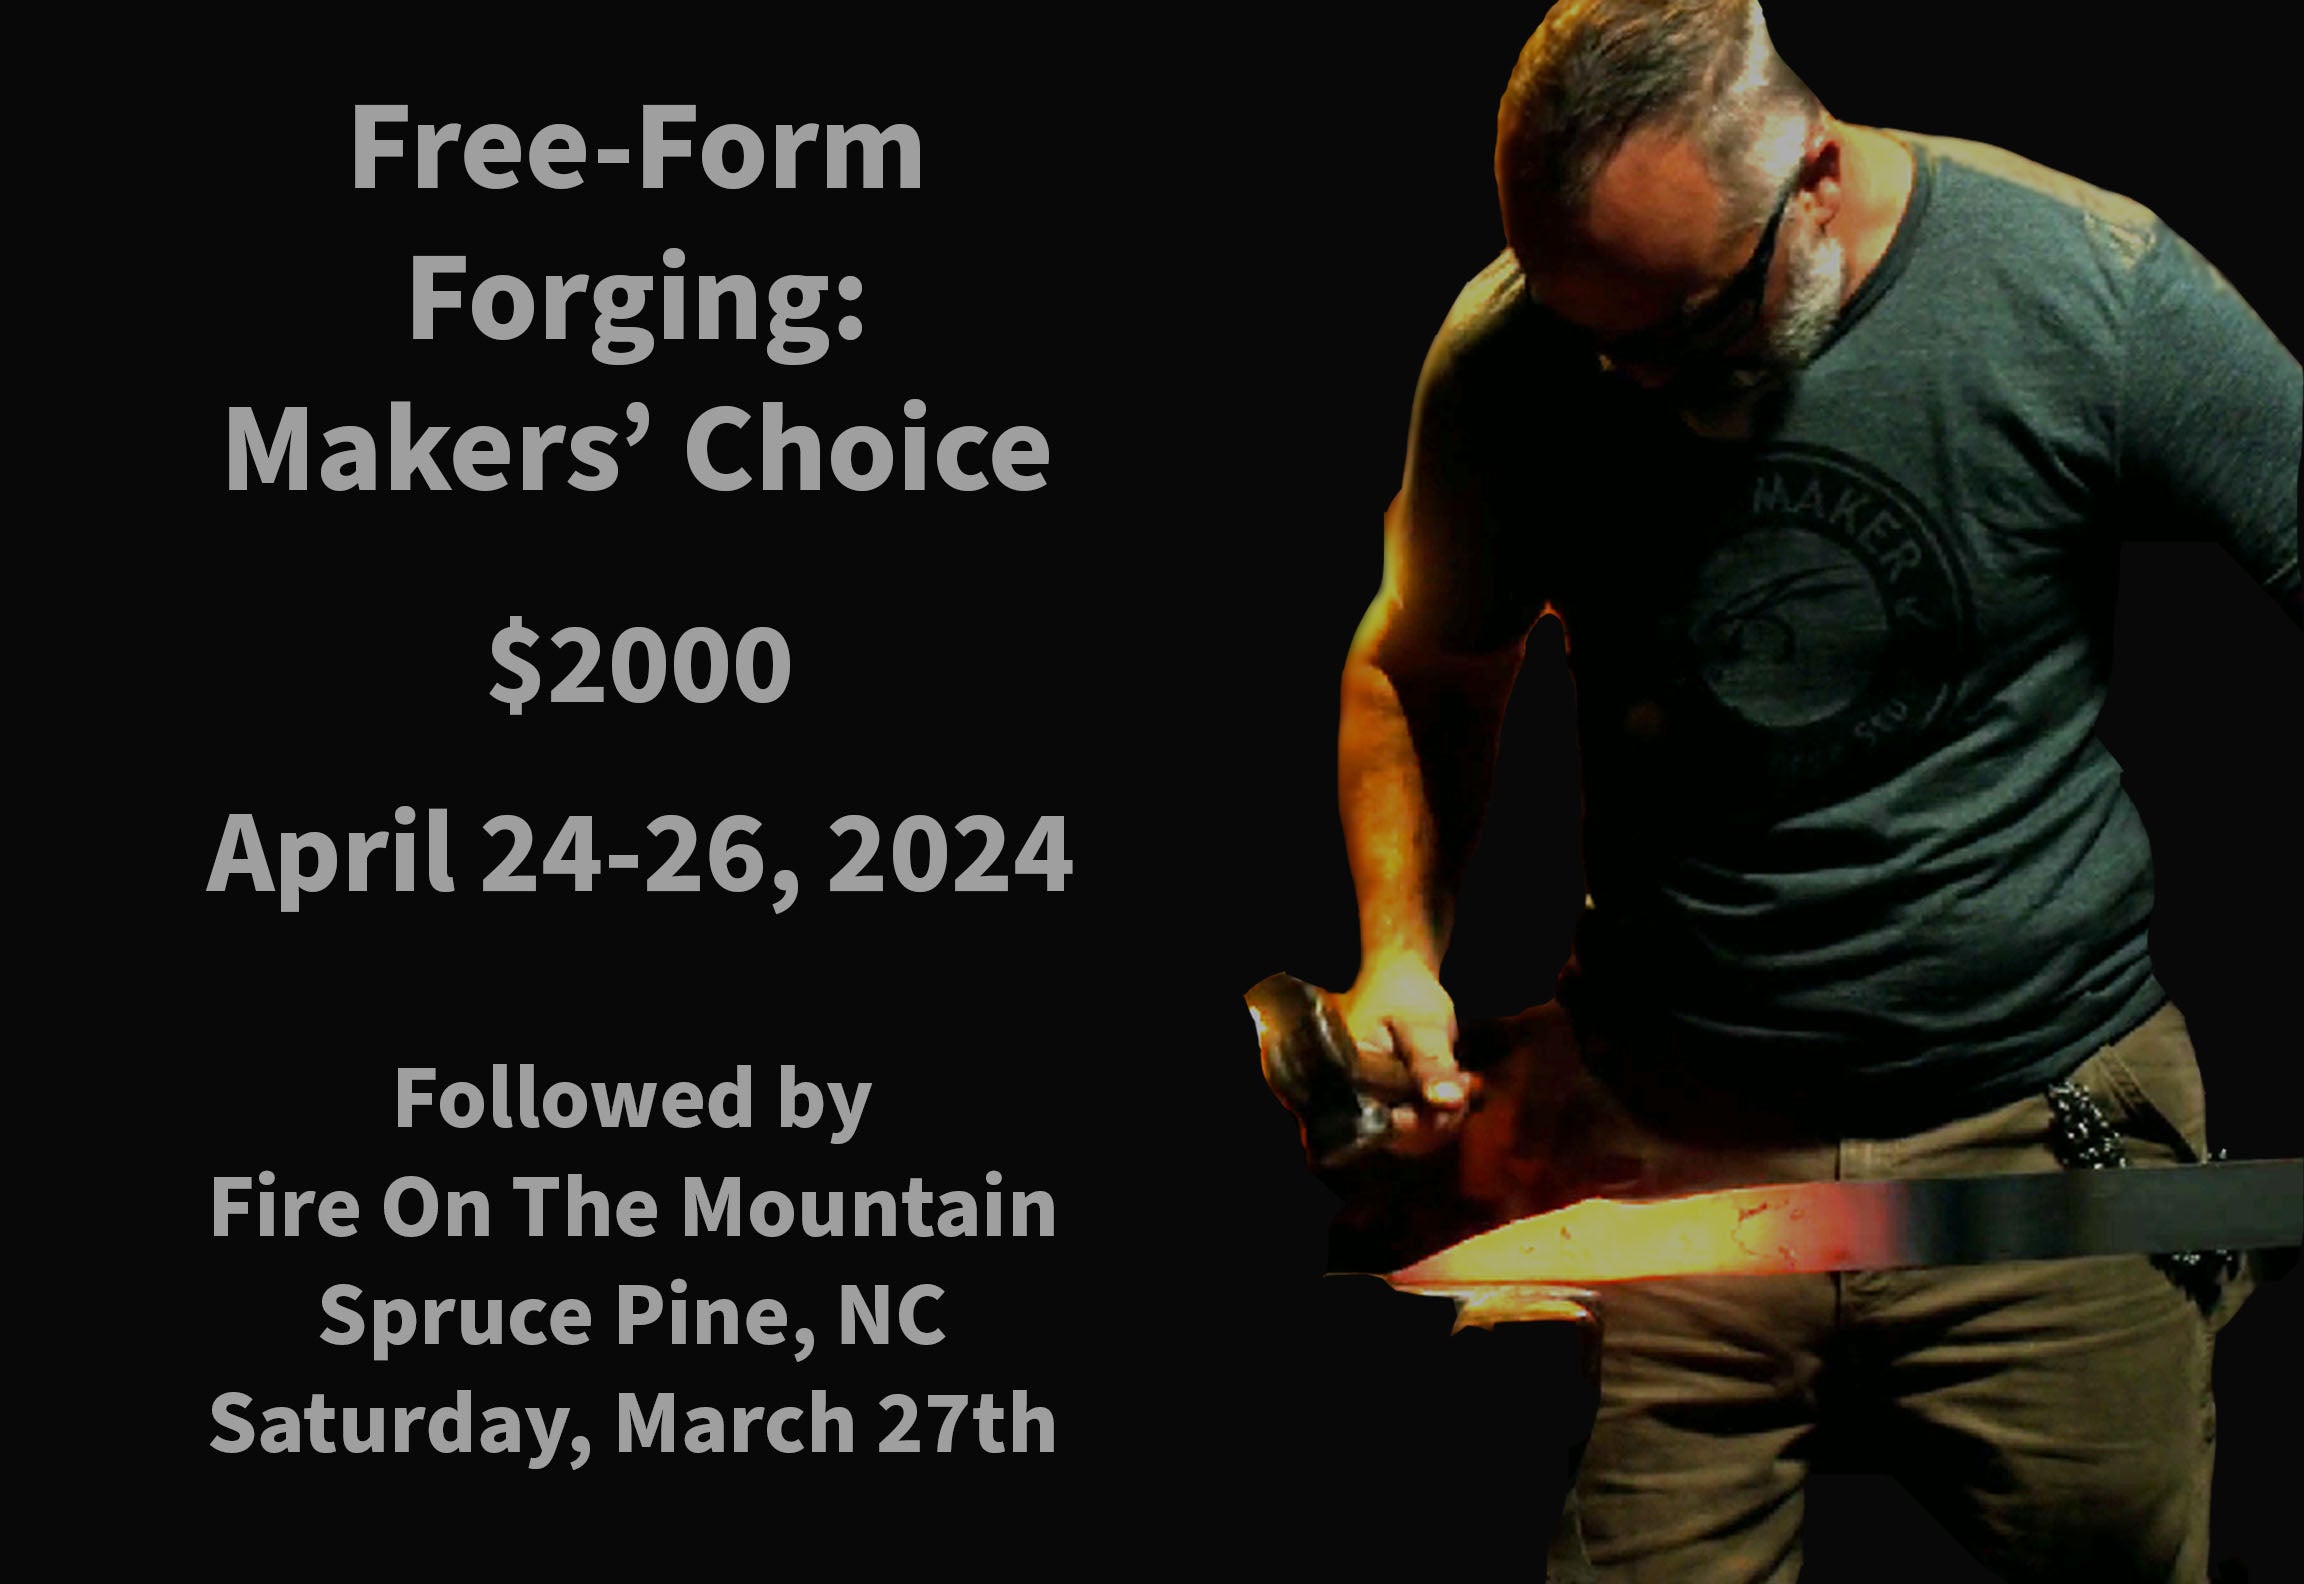 Free Form Forging: Makers Choice - $2000 ($300 Deposit)